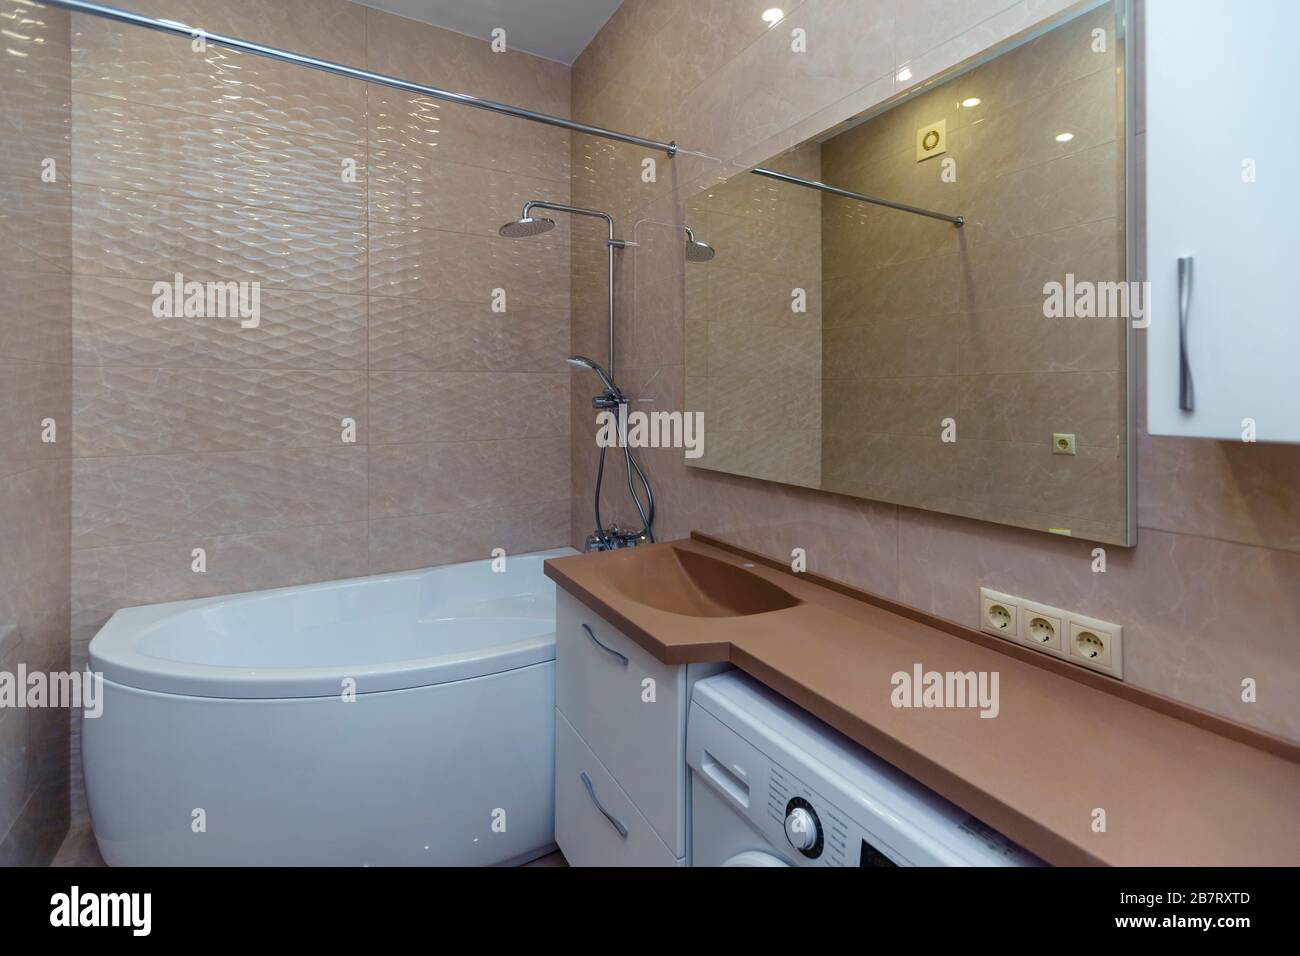 Bathroom With Brown Washbasin And Countertop White Cabinets Large Mirror Washing Machine Toilet Beige Wall Tiles Stock Photo Alamy,Quinoa Protein Per 100g